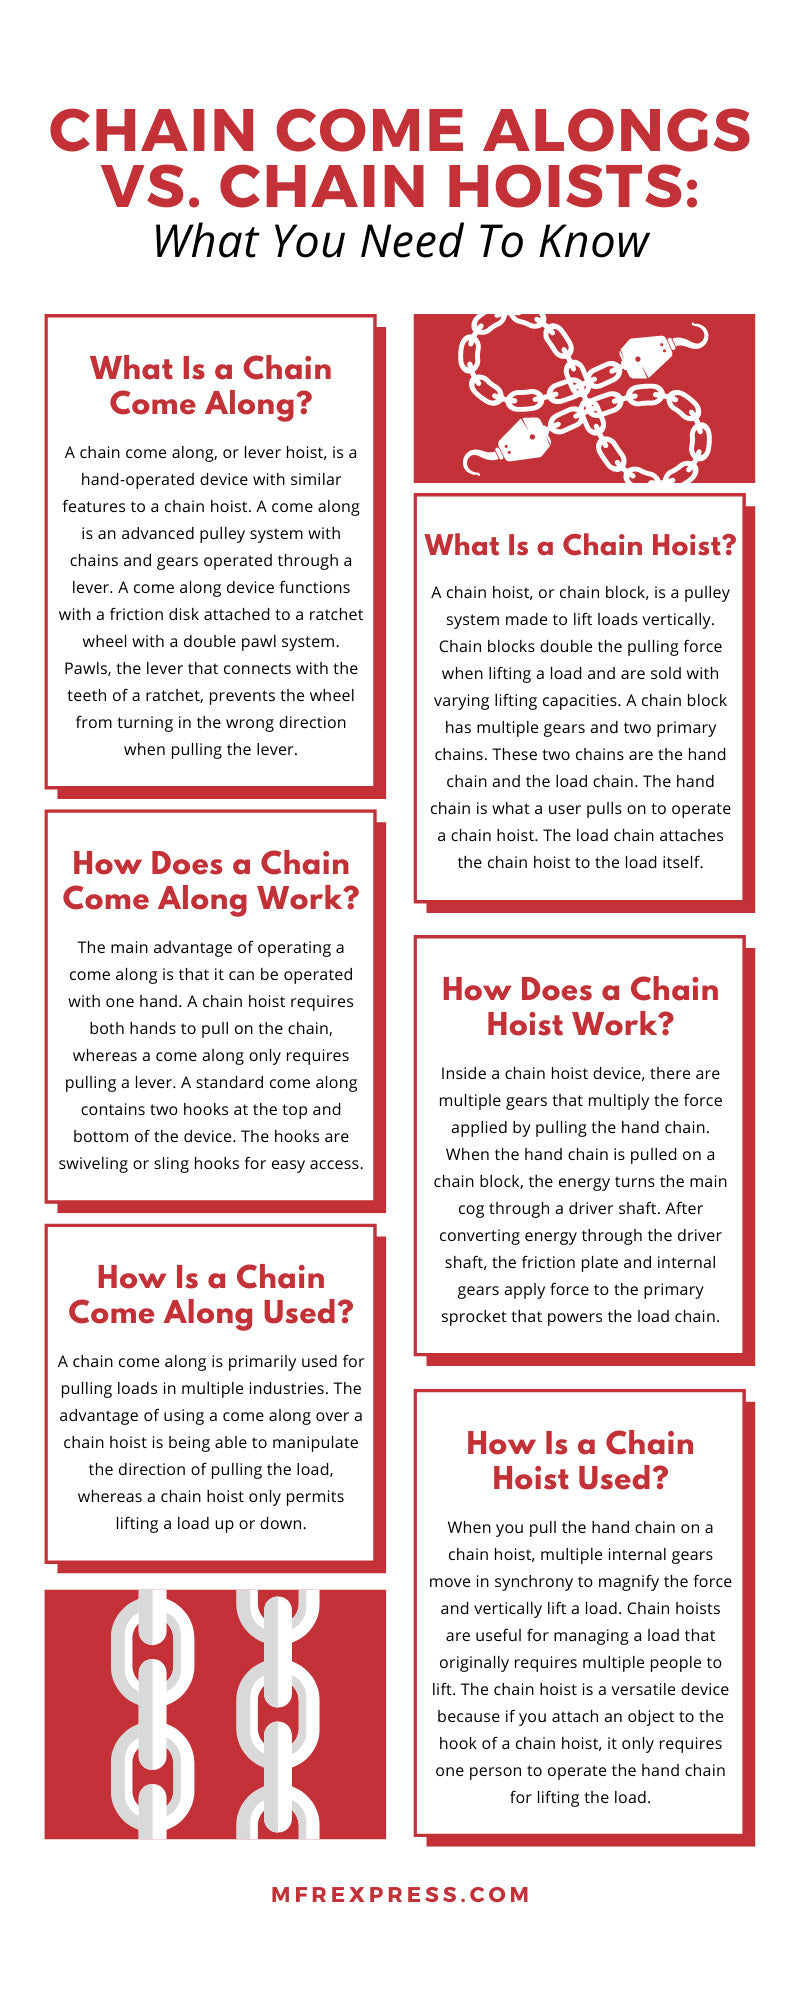 Chain Come Alongs vs. Chain Hoists: What You Need To Know